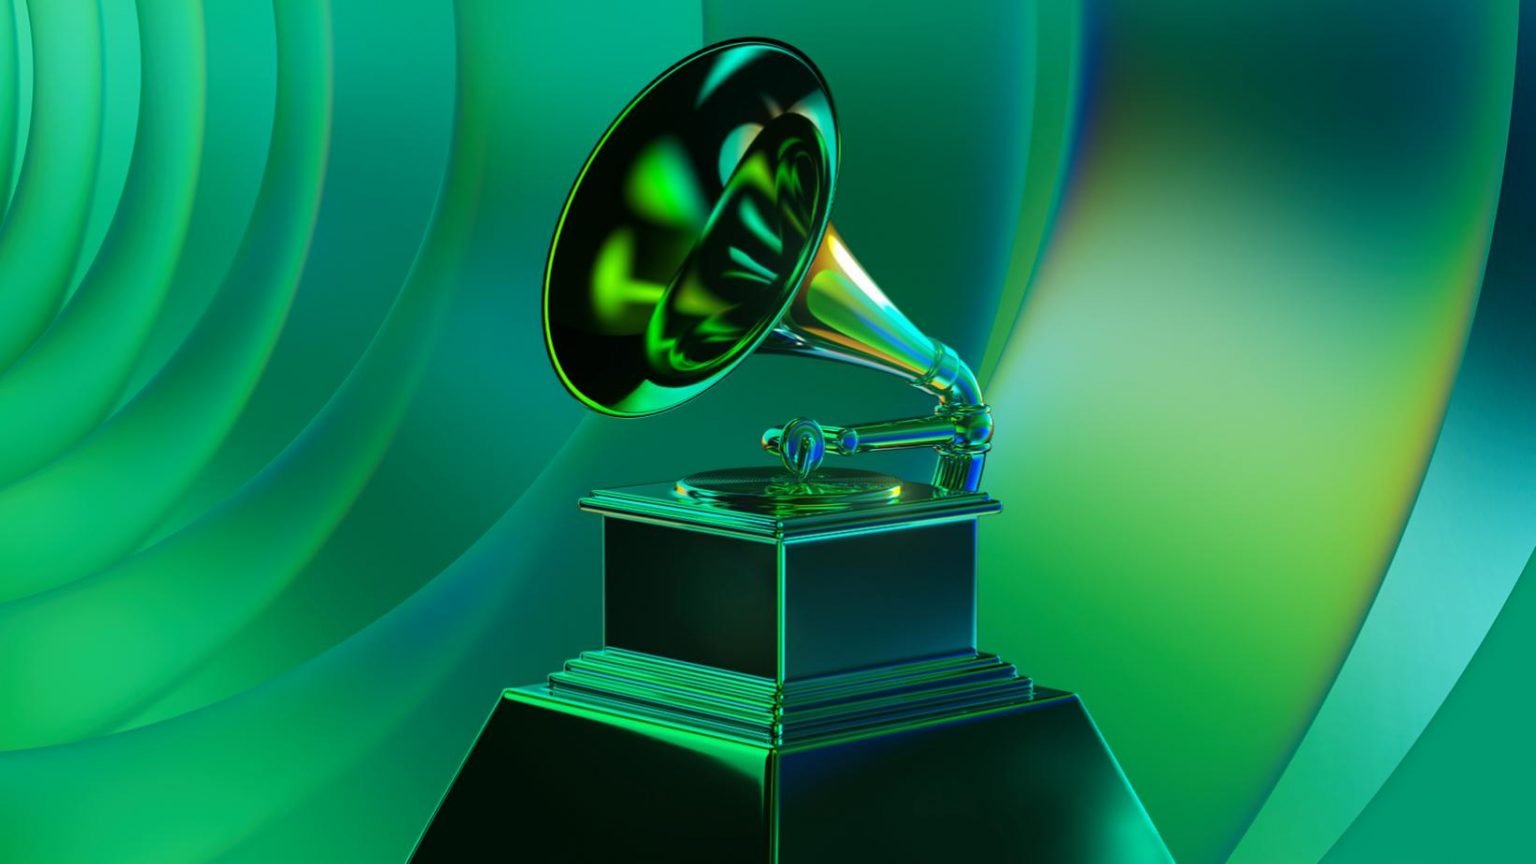 Grammy 2022: New Venue and Date Announced